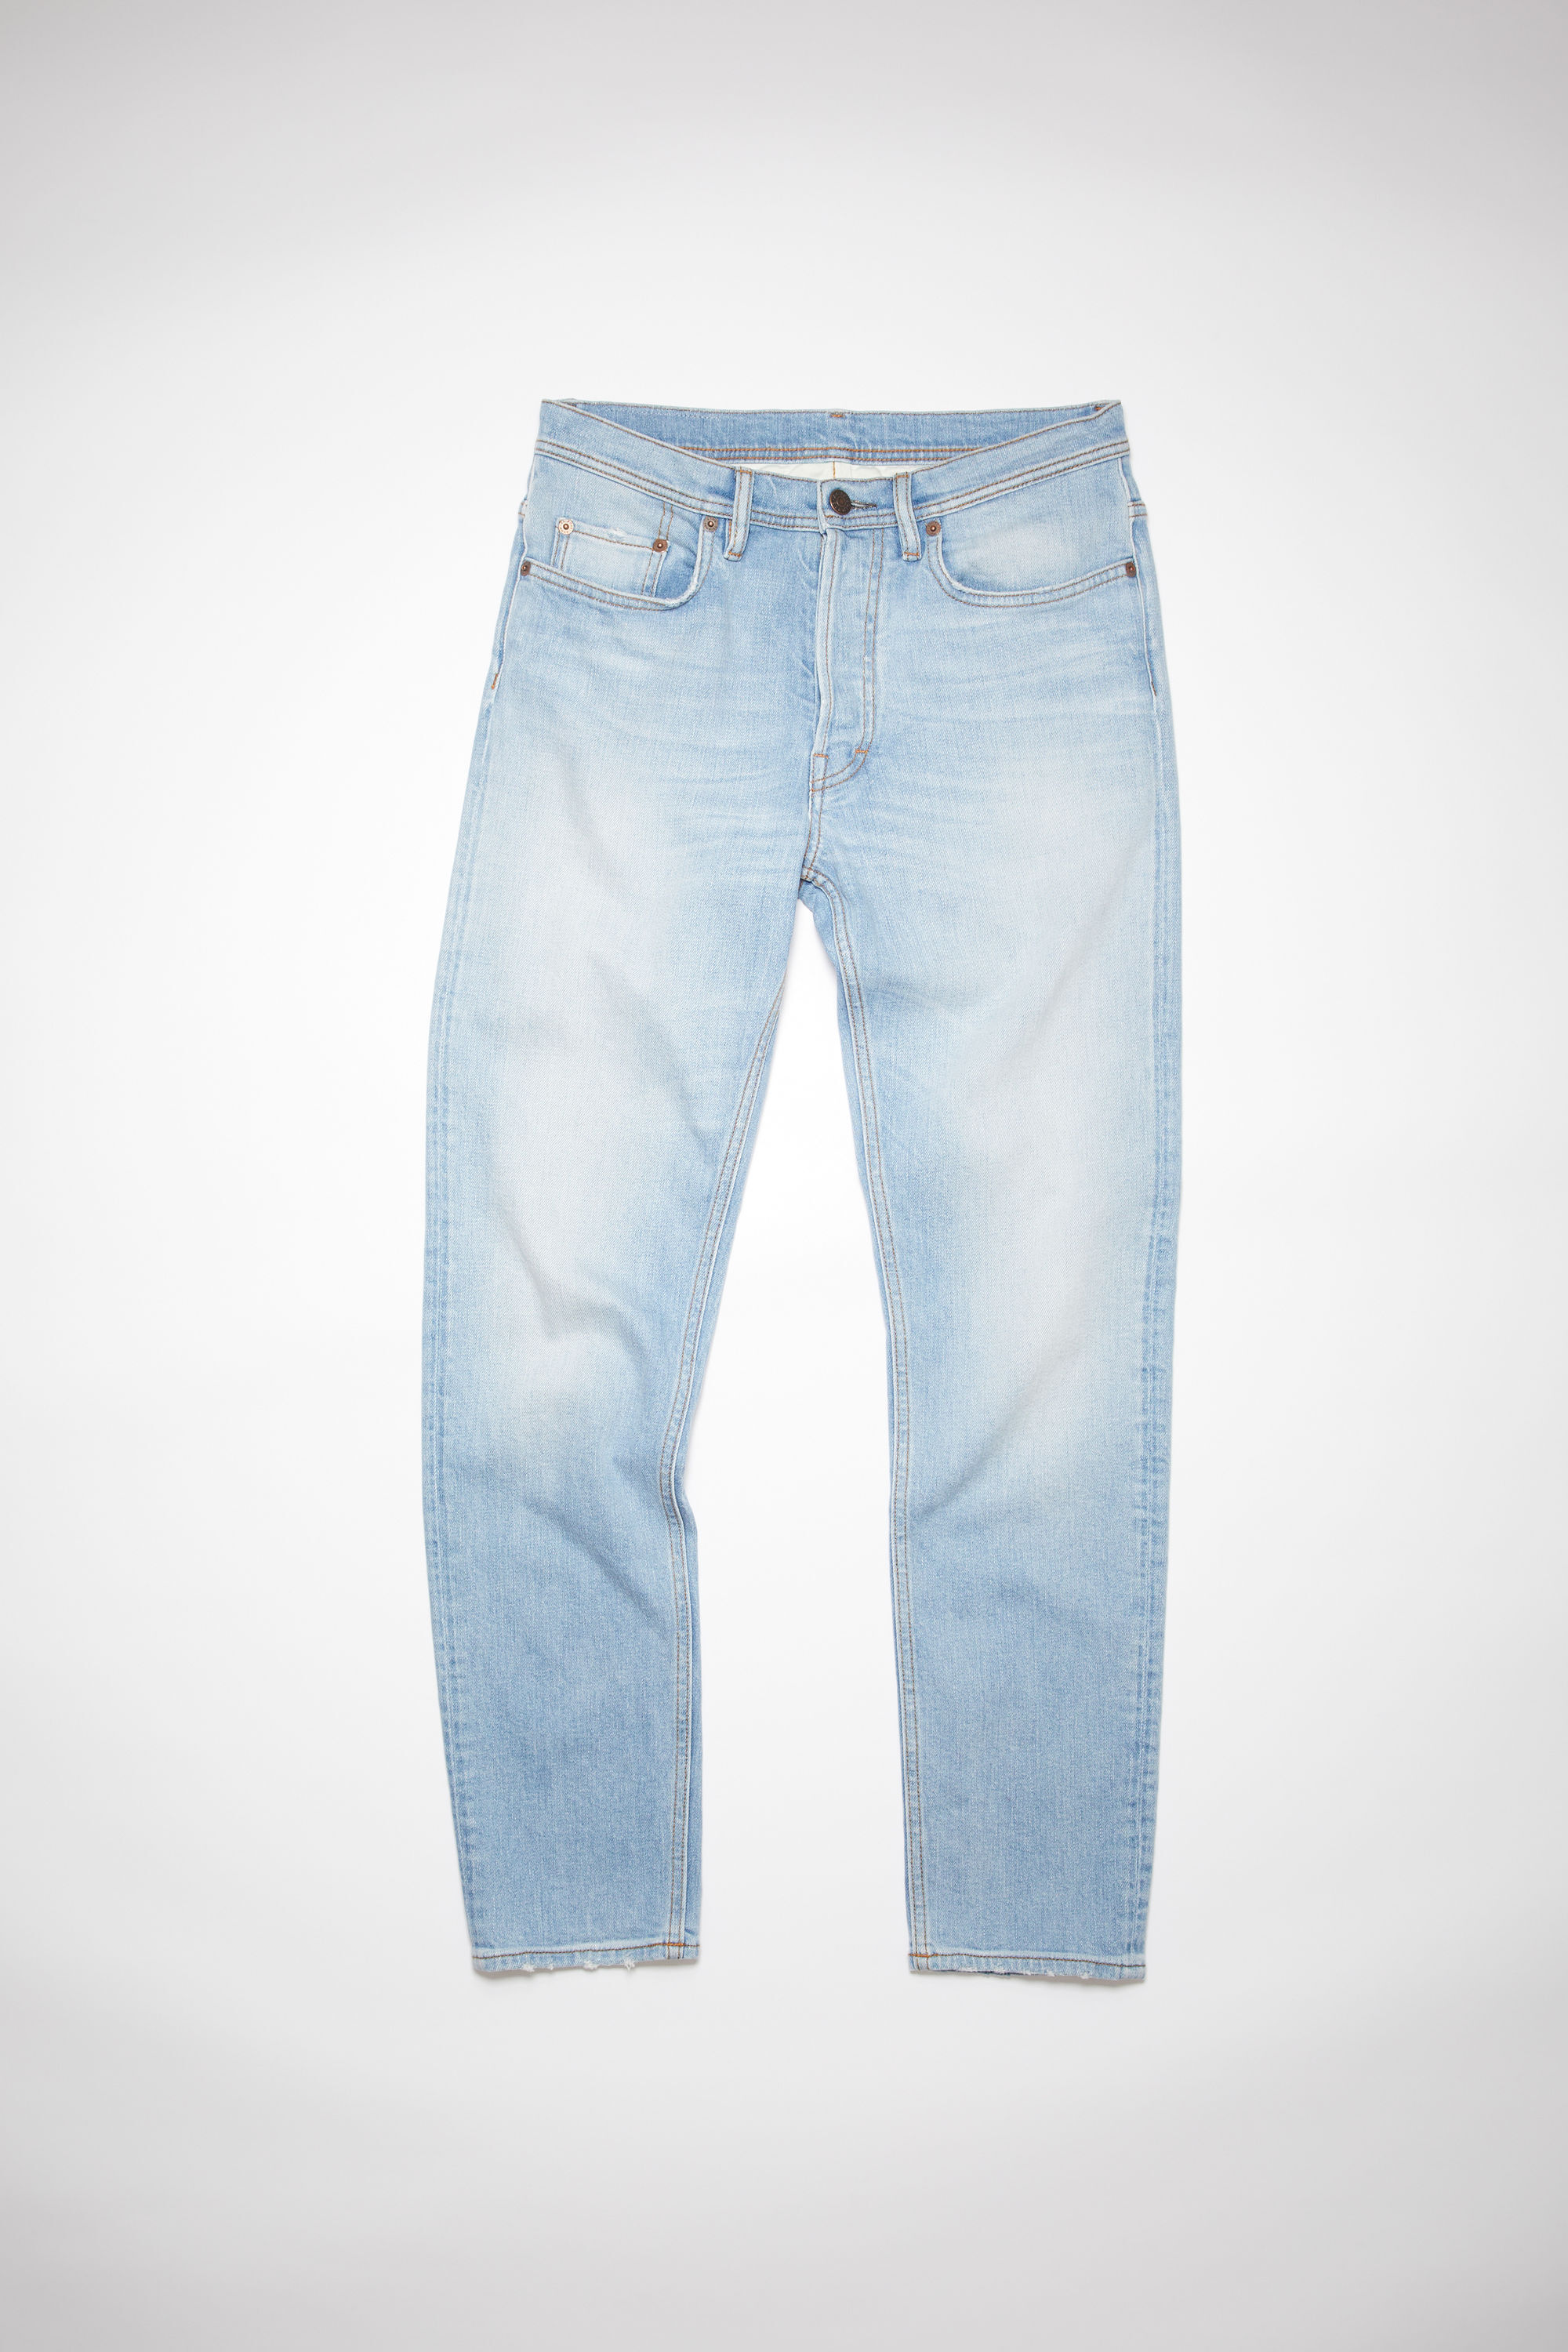 Acne Studios Denim River Cropped Jeans in Blue for Men Mens Clothing Jeans Straight-leg jeans Save 10% 